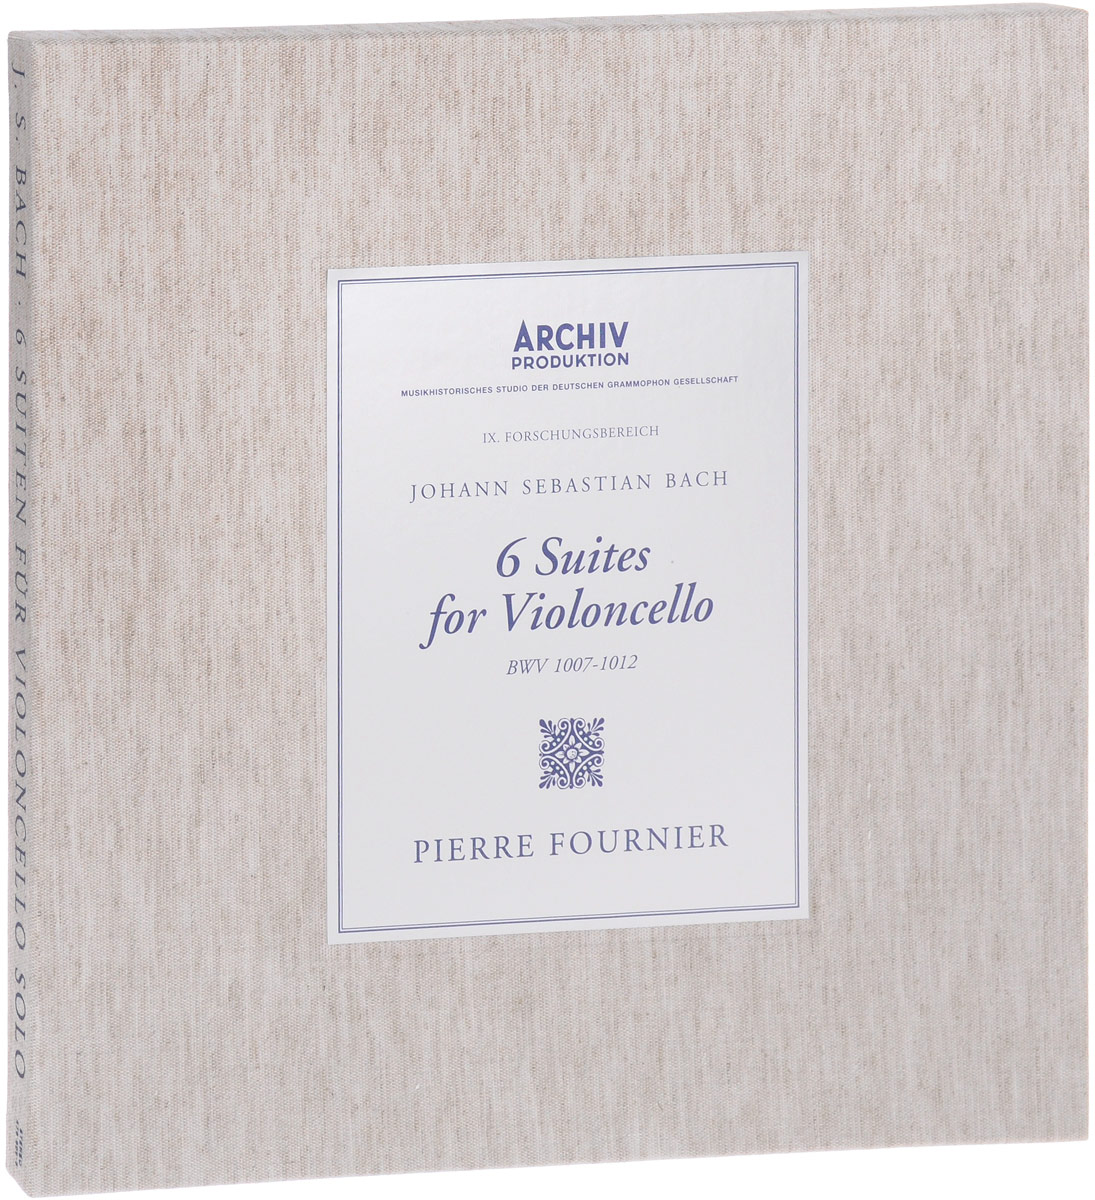 Pierre Fournier. J. S. Bach. 6 Suites For Violoncello BWV 1007-1012. Numbered Limited Deluxe Edition (3 LP)